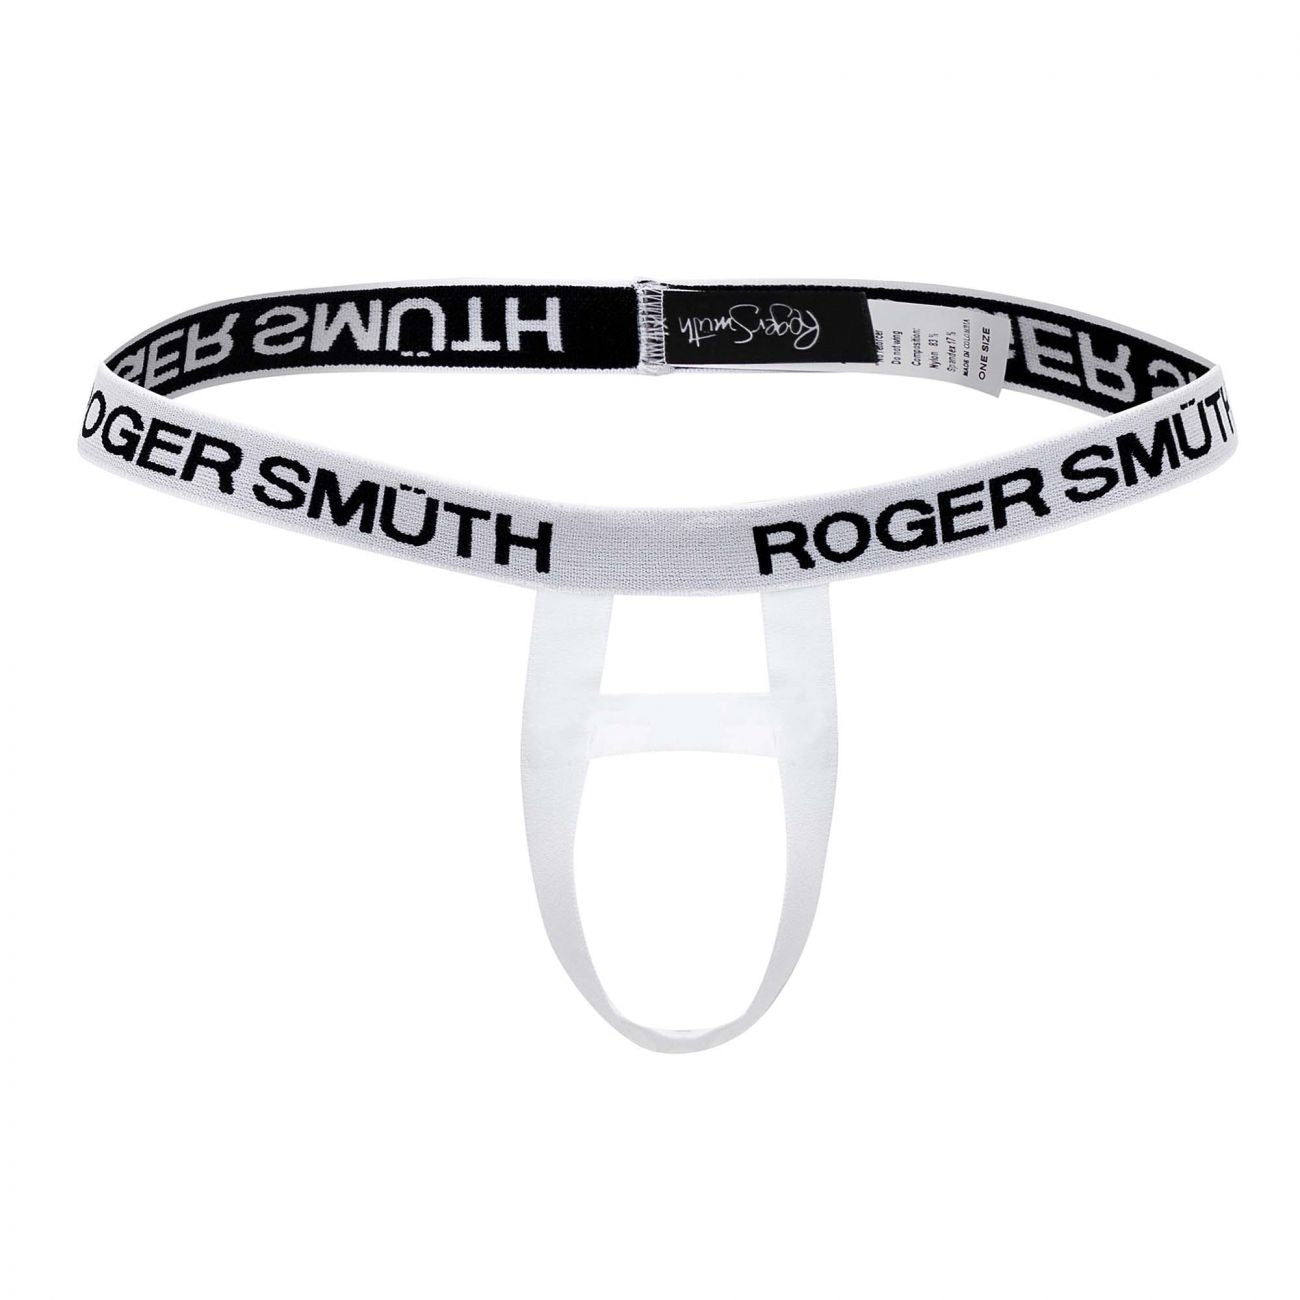 Roger Smuth RS055 Ball Lifter White